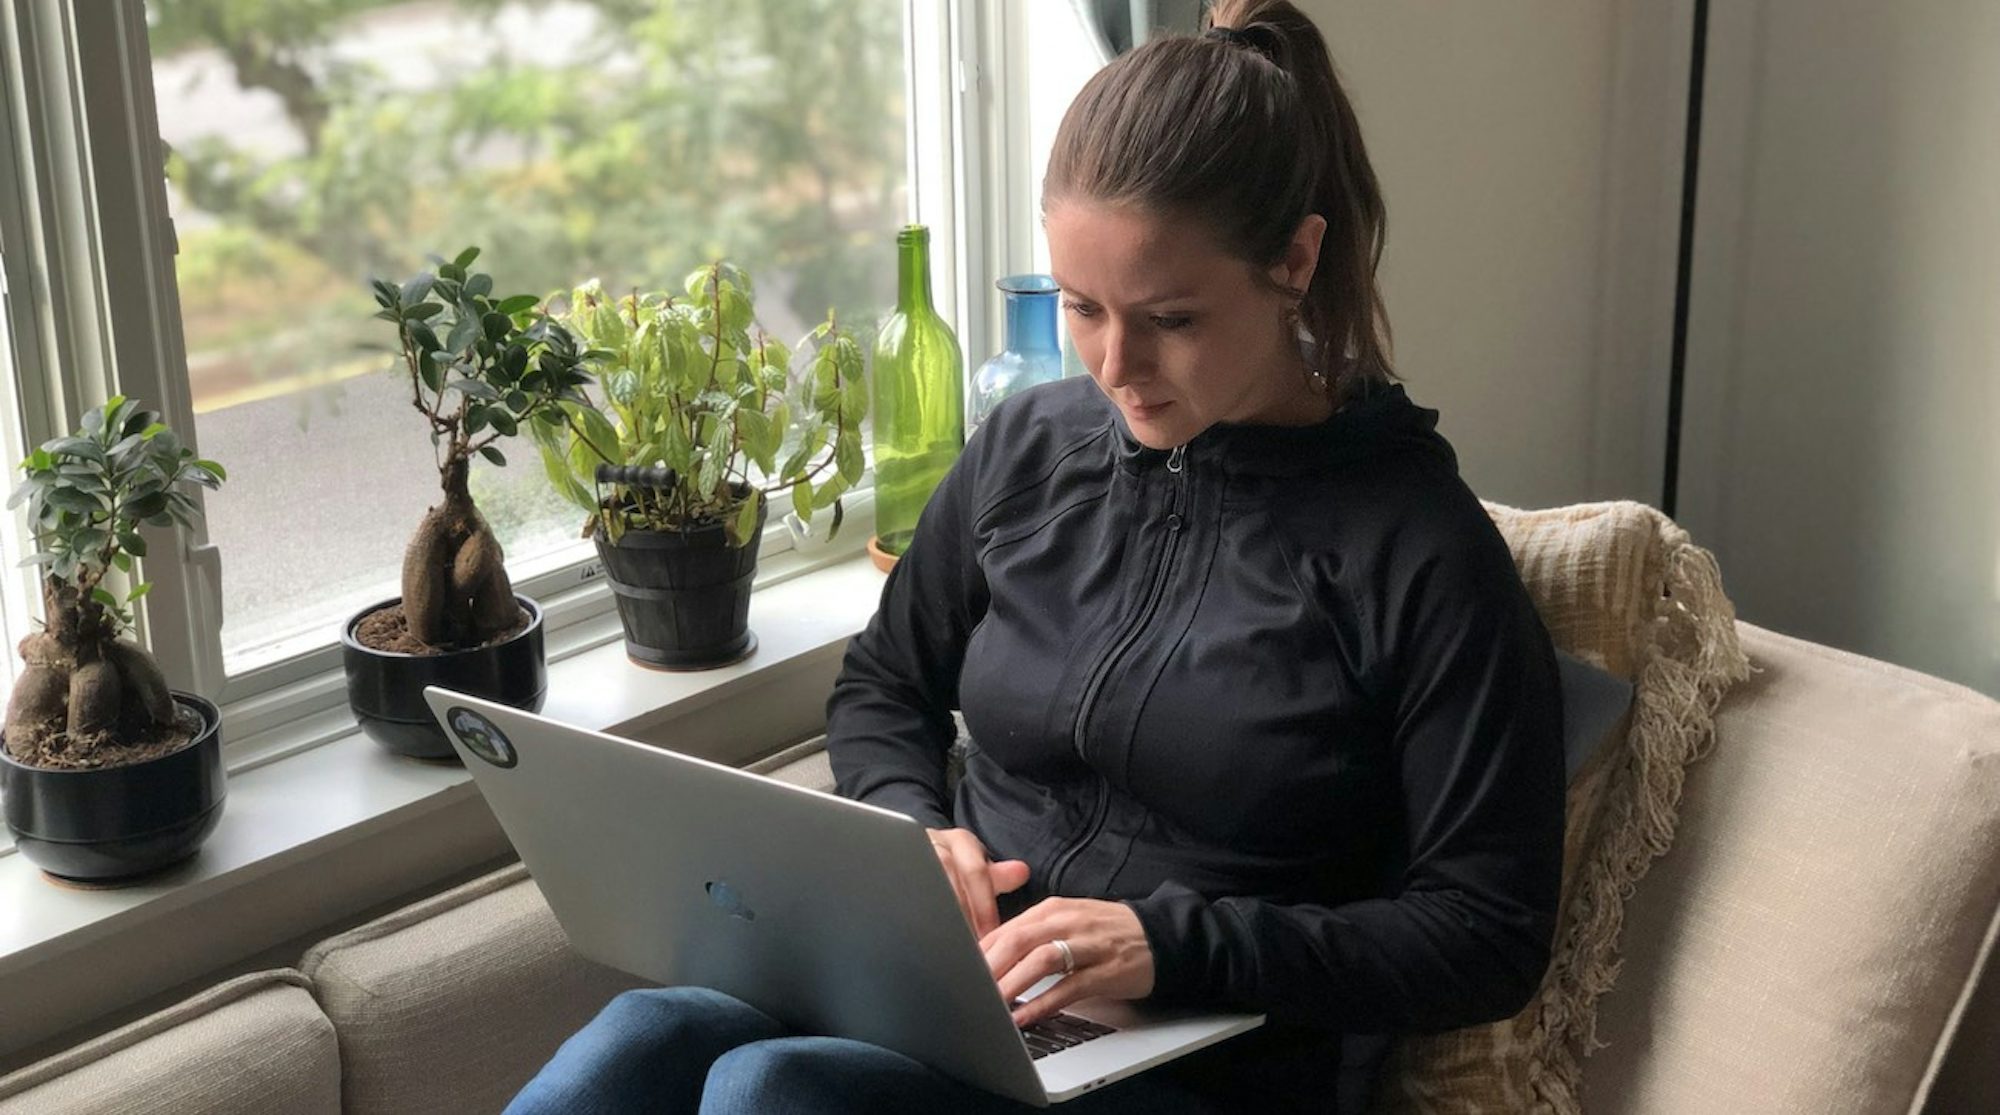 CircleCI employee working on laptop at home, seated by a window with potted plants